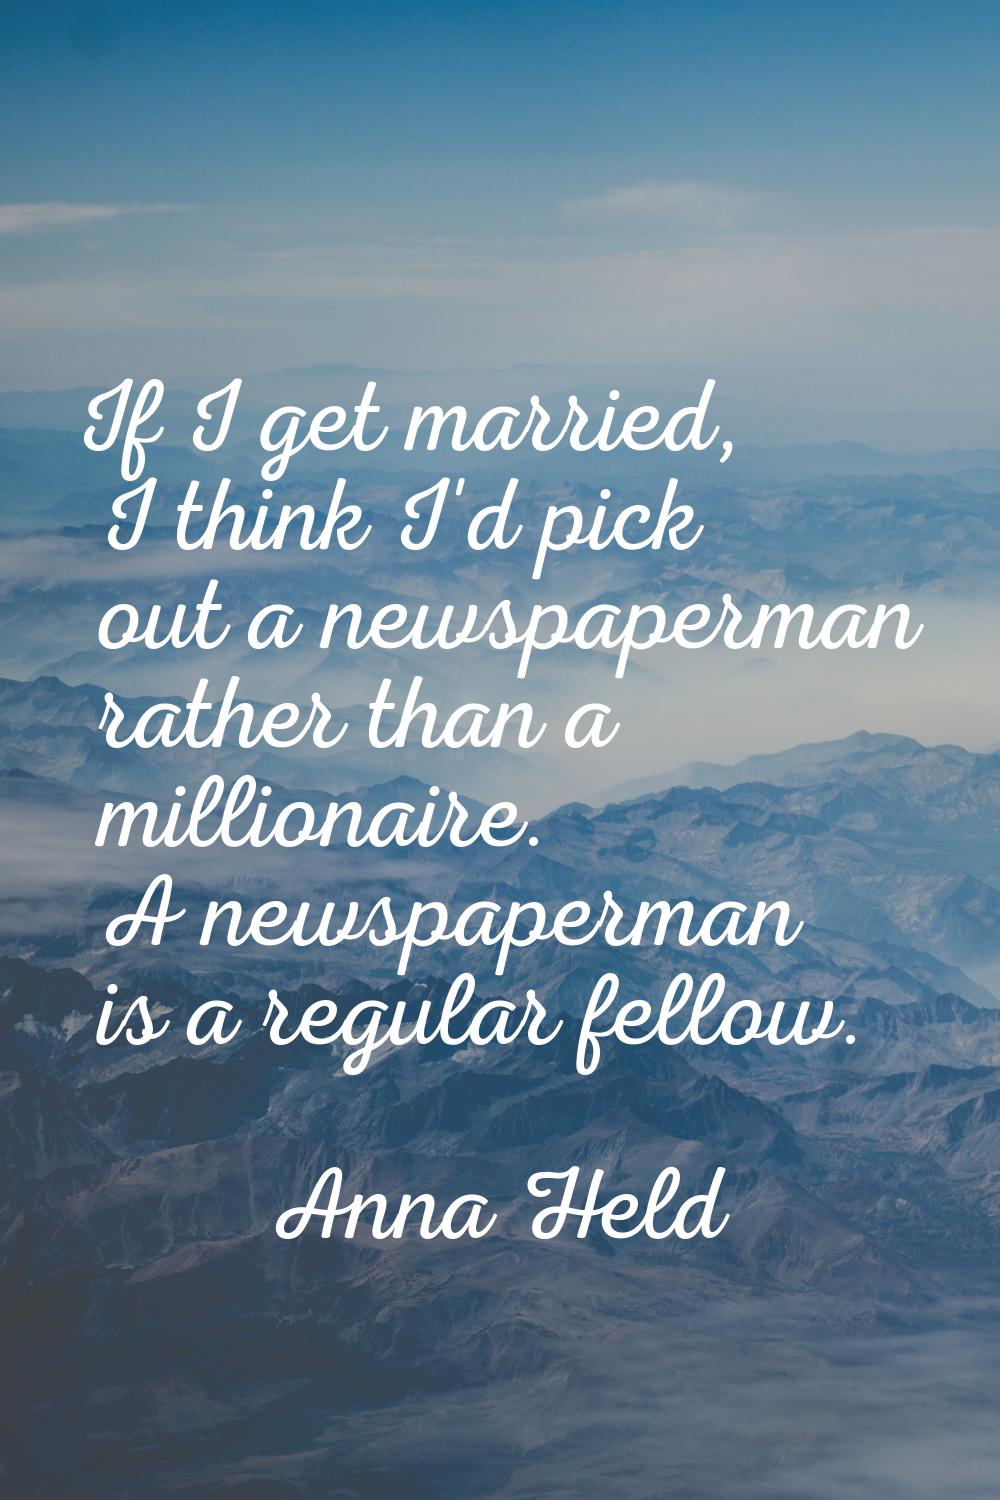 If I get married, I think I'd pick out a newspaperman rather than a millionaire. A newspaperman is 